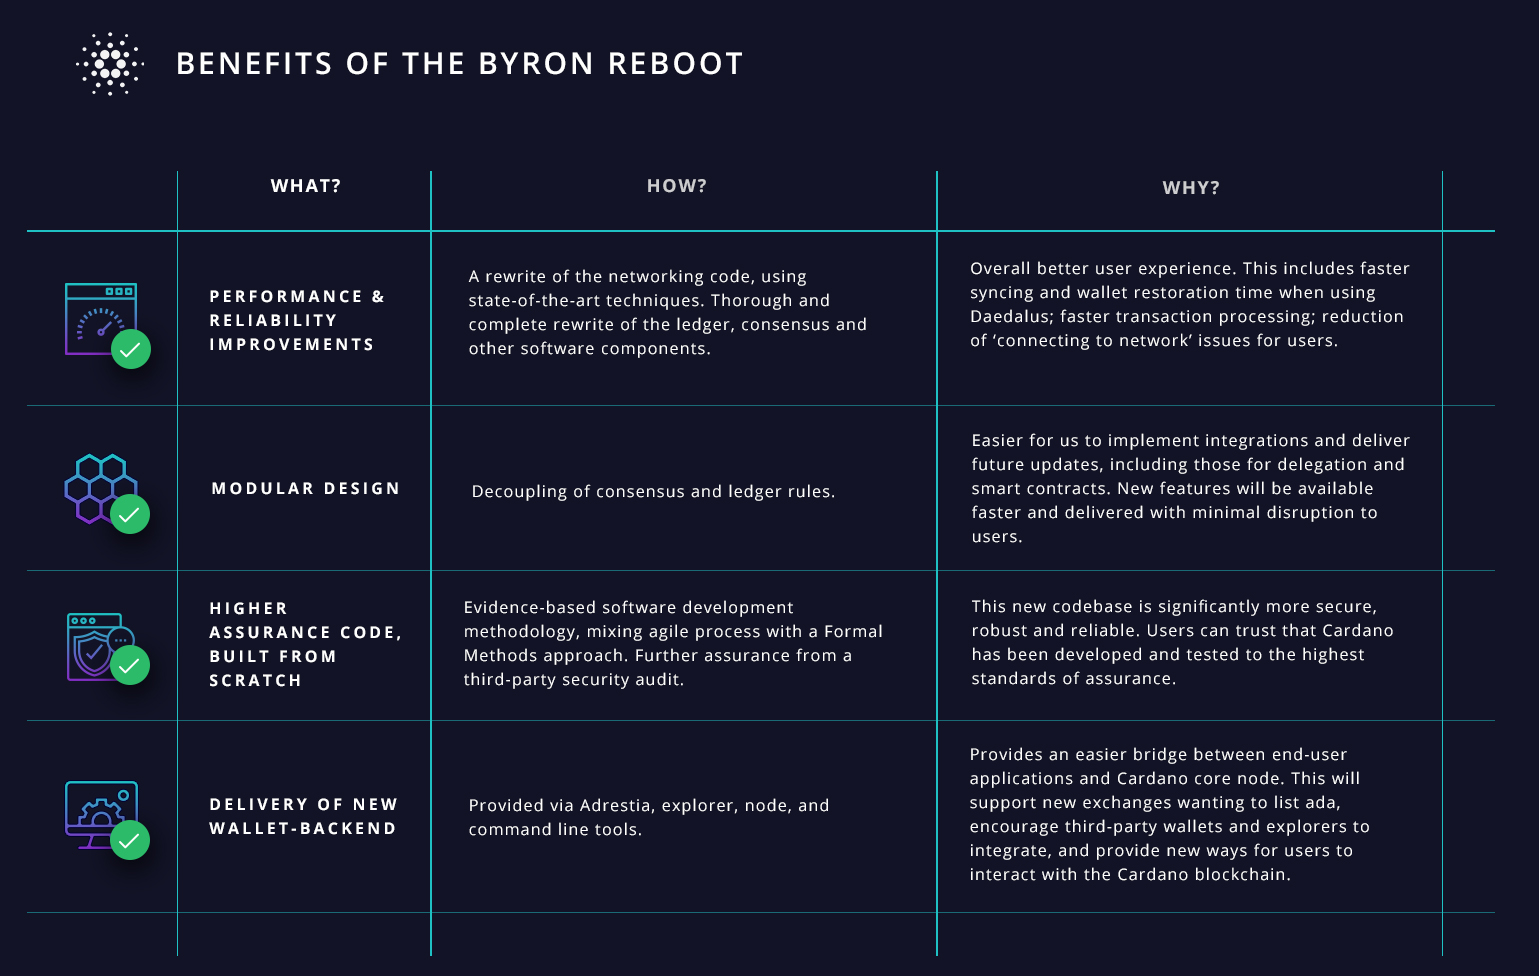 Benefits of the Byron reboot